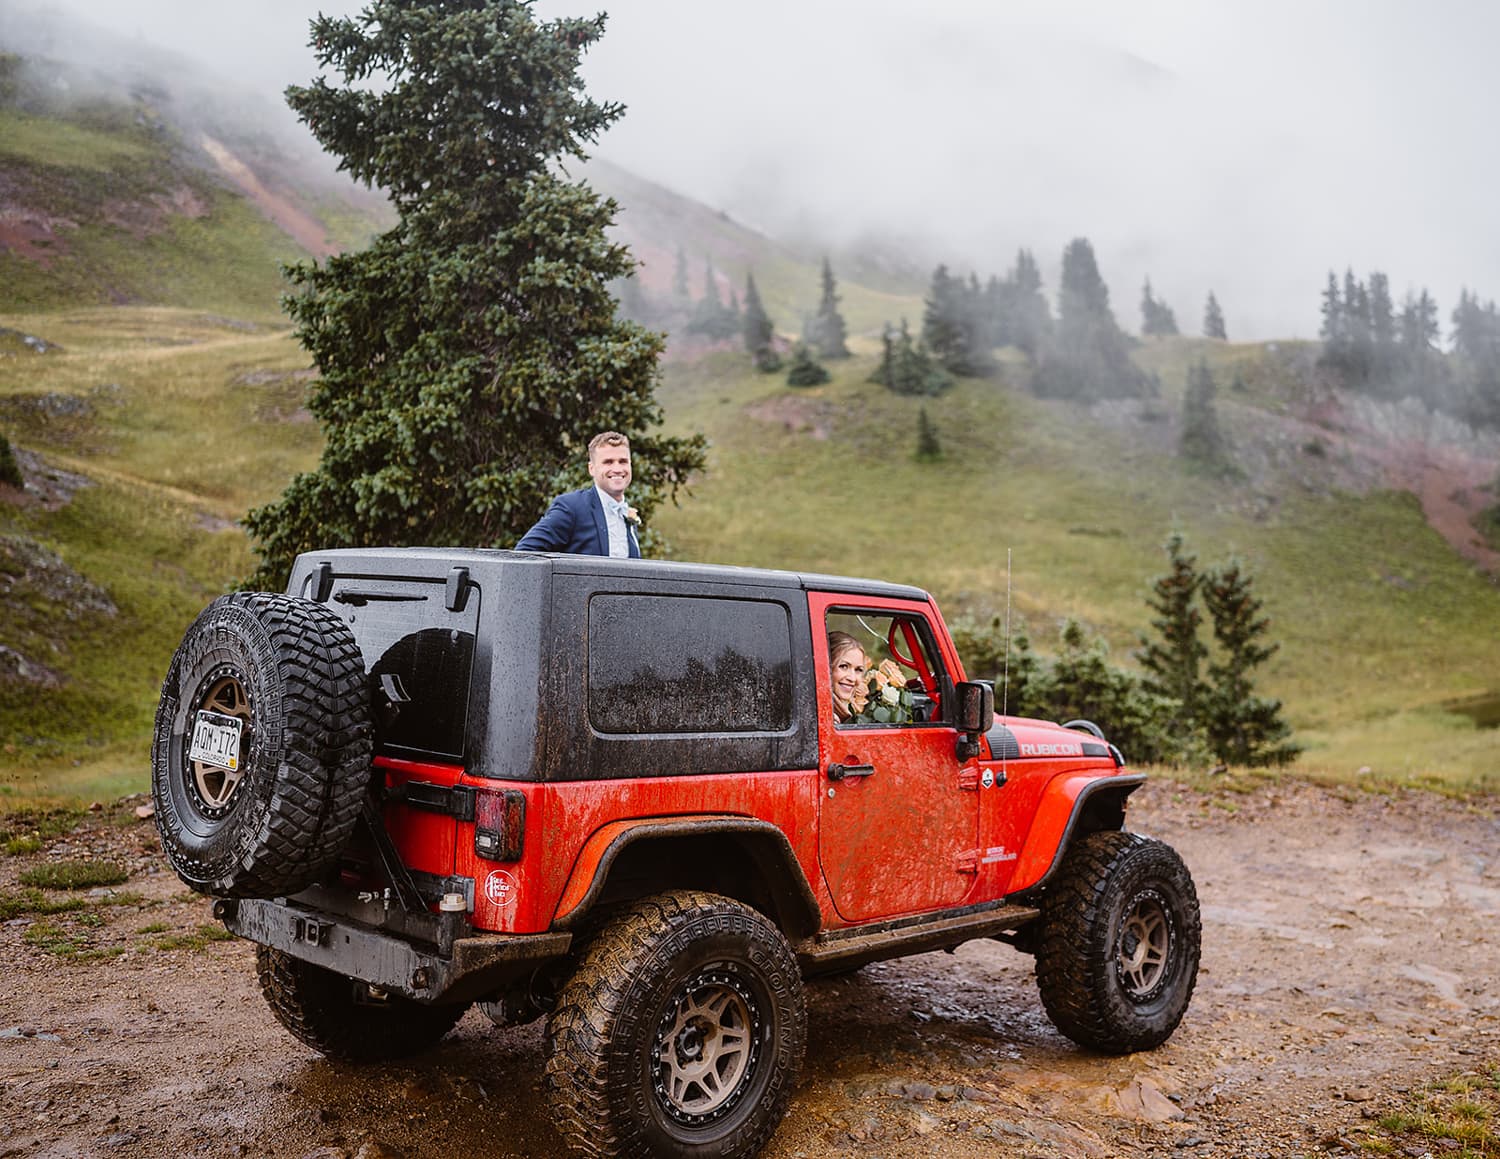 Couple in a jeep for their elopement activity.